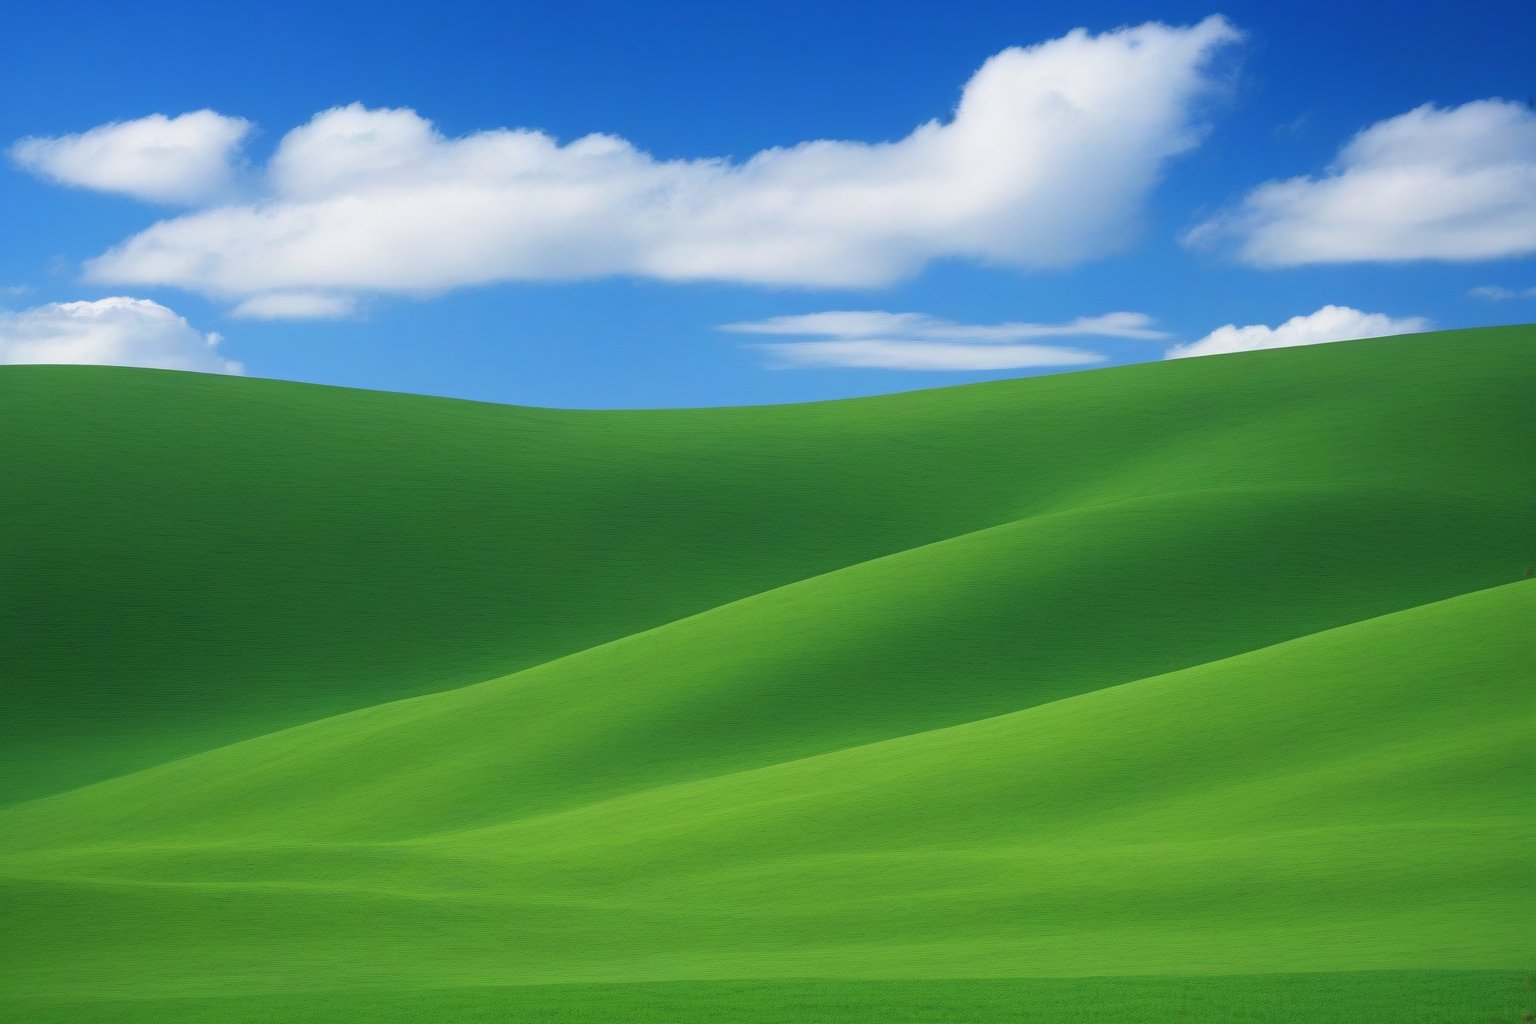 microsoft windows xp wallpaper, Bucolic Green Hills, unedited photograph of a green hill and blue sky with white clouds, Charles O'Rear photograph, epic, gorgeous, vivid colors, bright image
